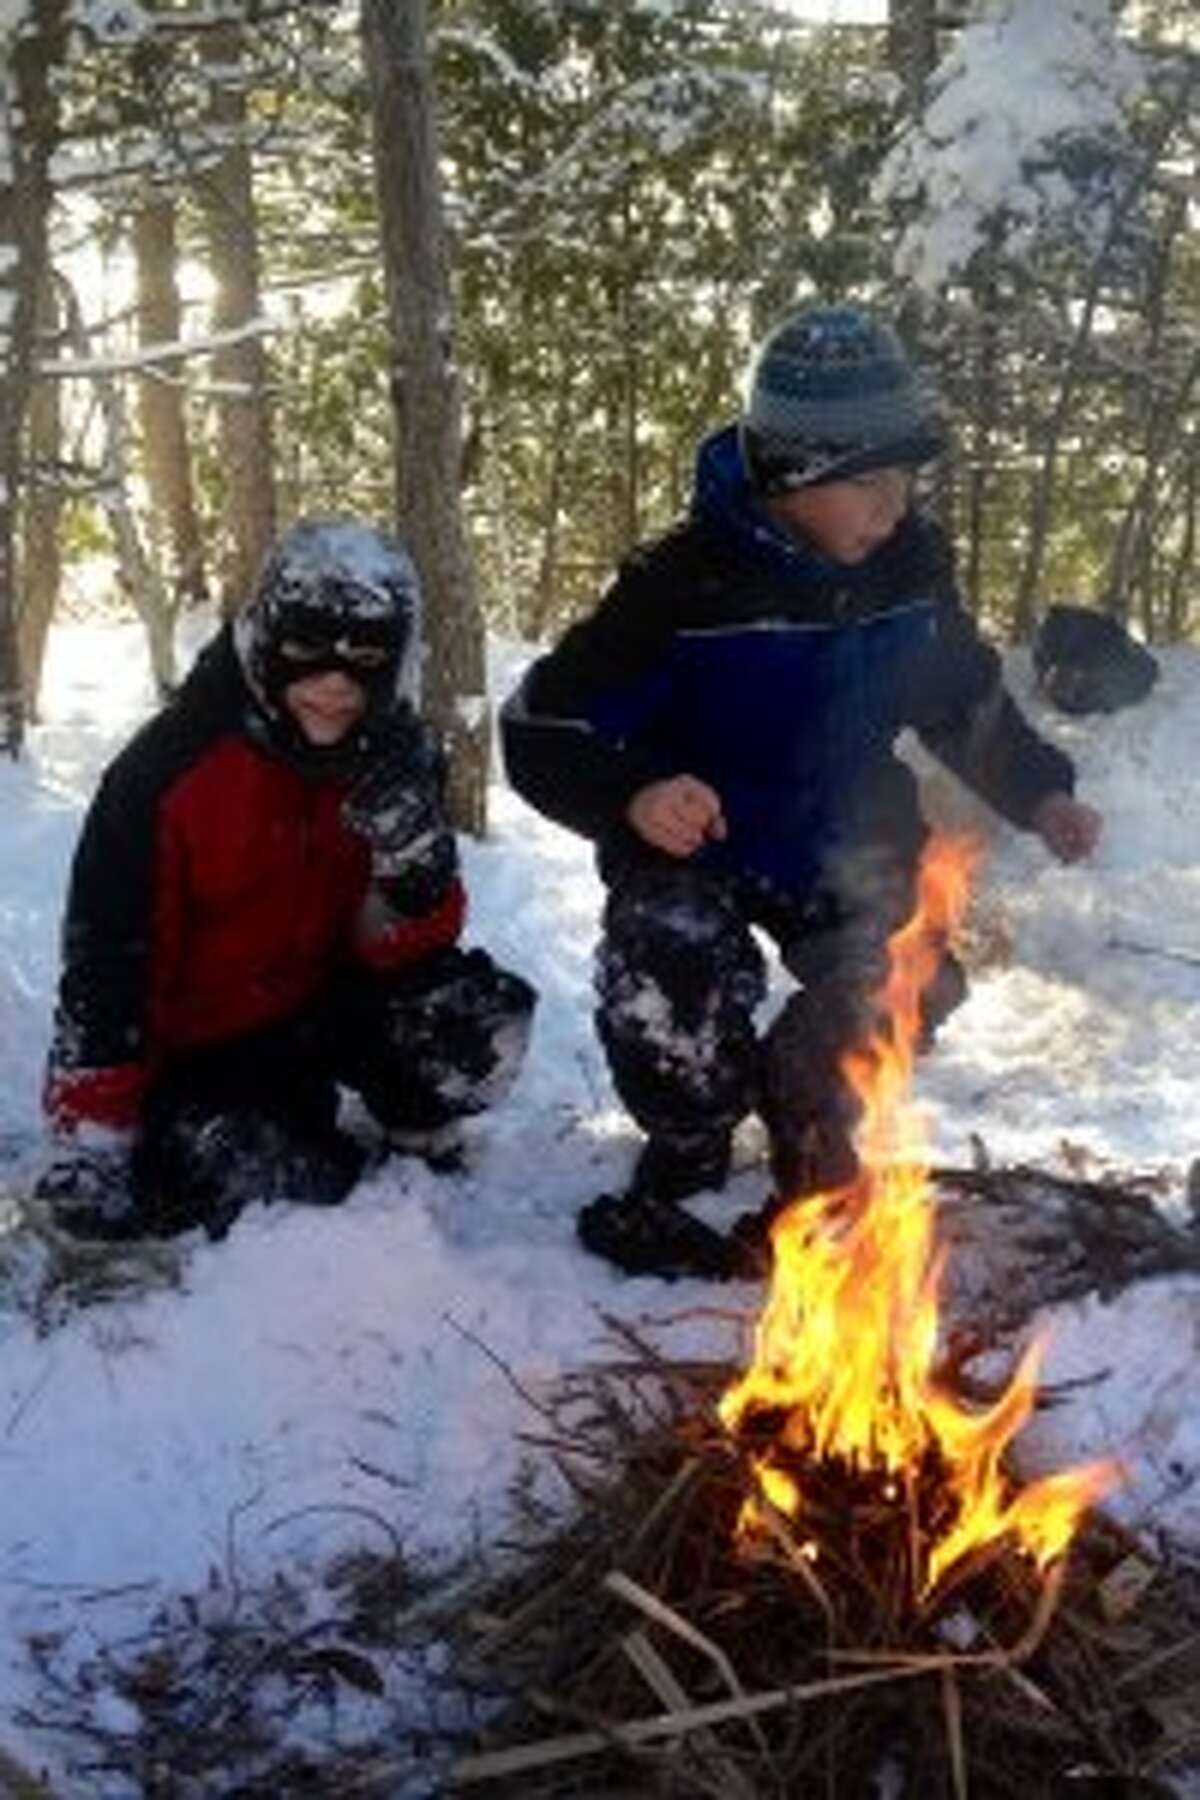 Staying warm: Jagger and Zach learn how to build a fire during survival training. Students were able to enjoy their fires by making s’mores.” Photos/Julie Mountz